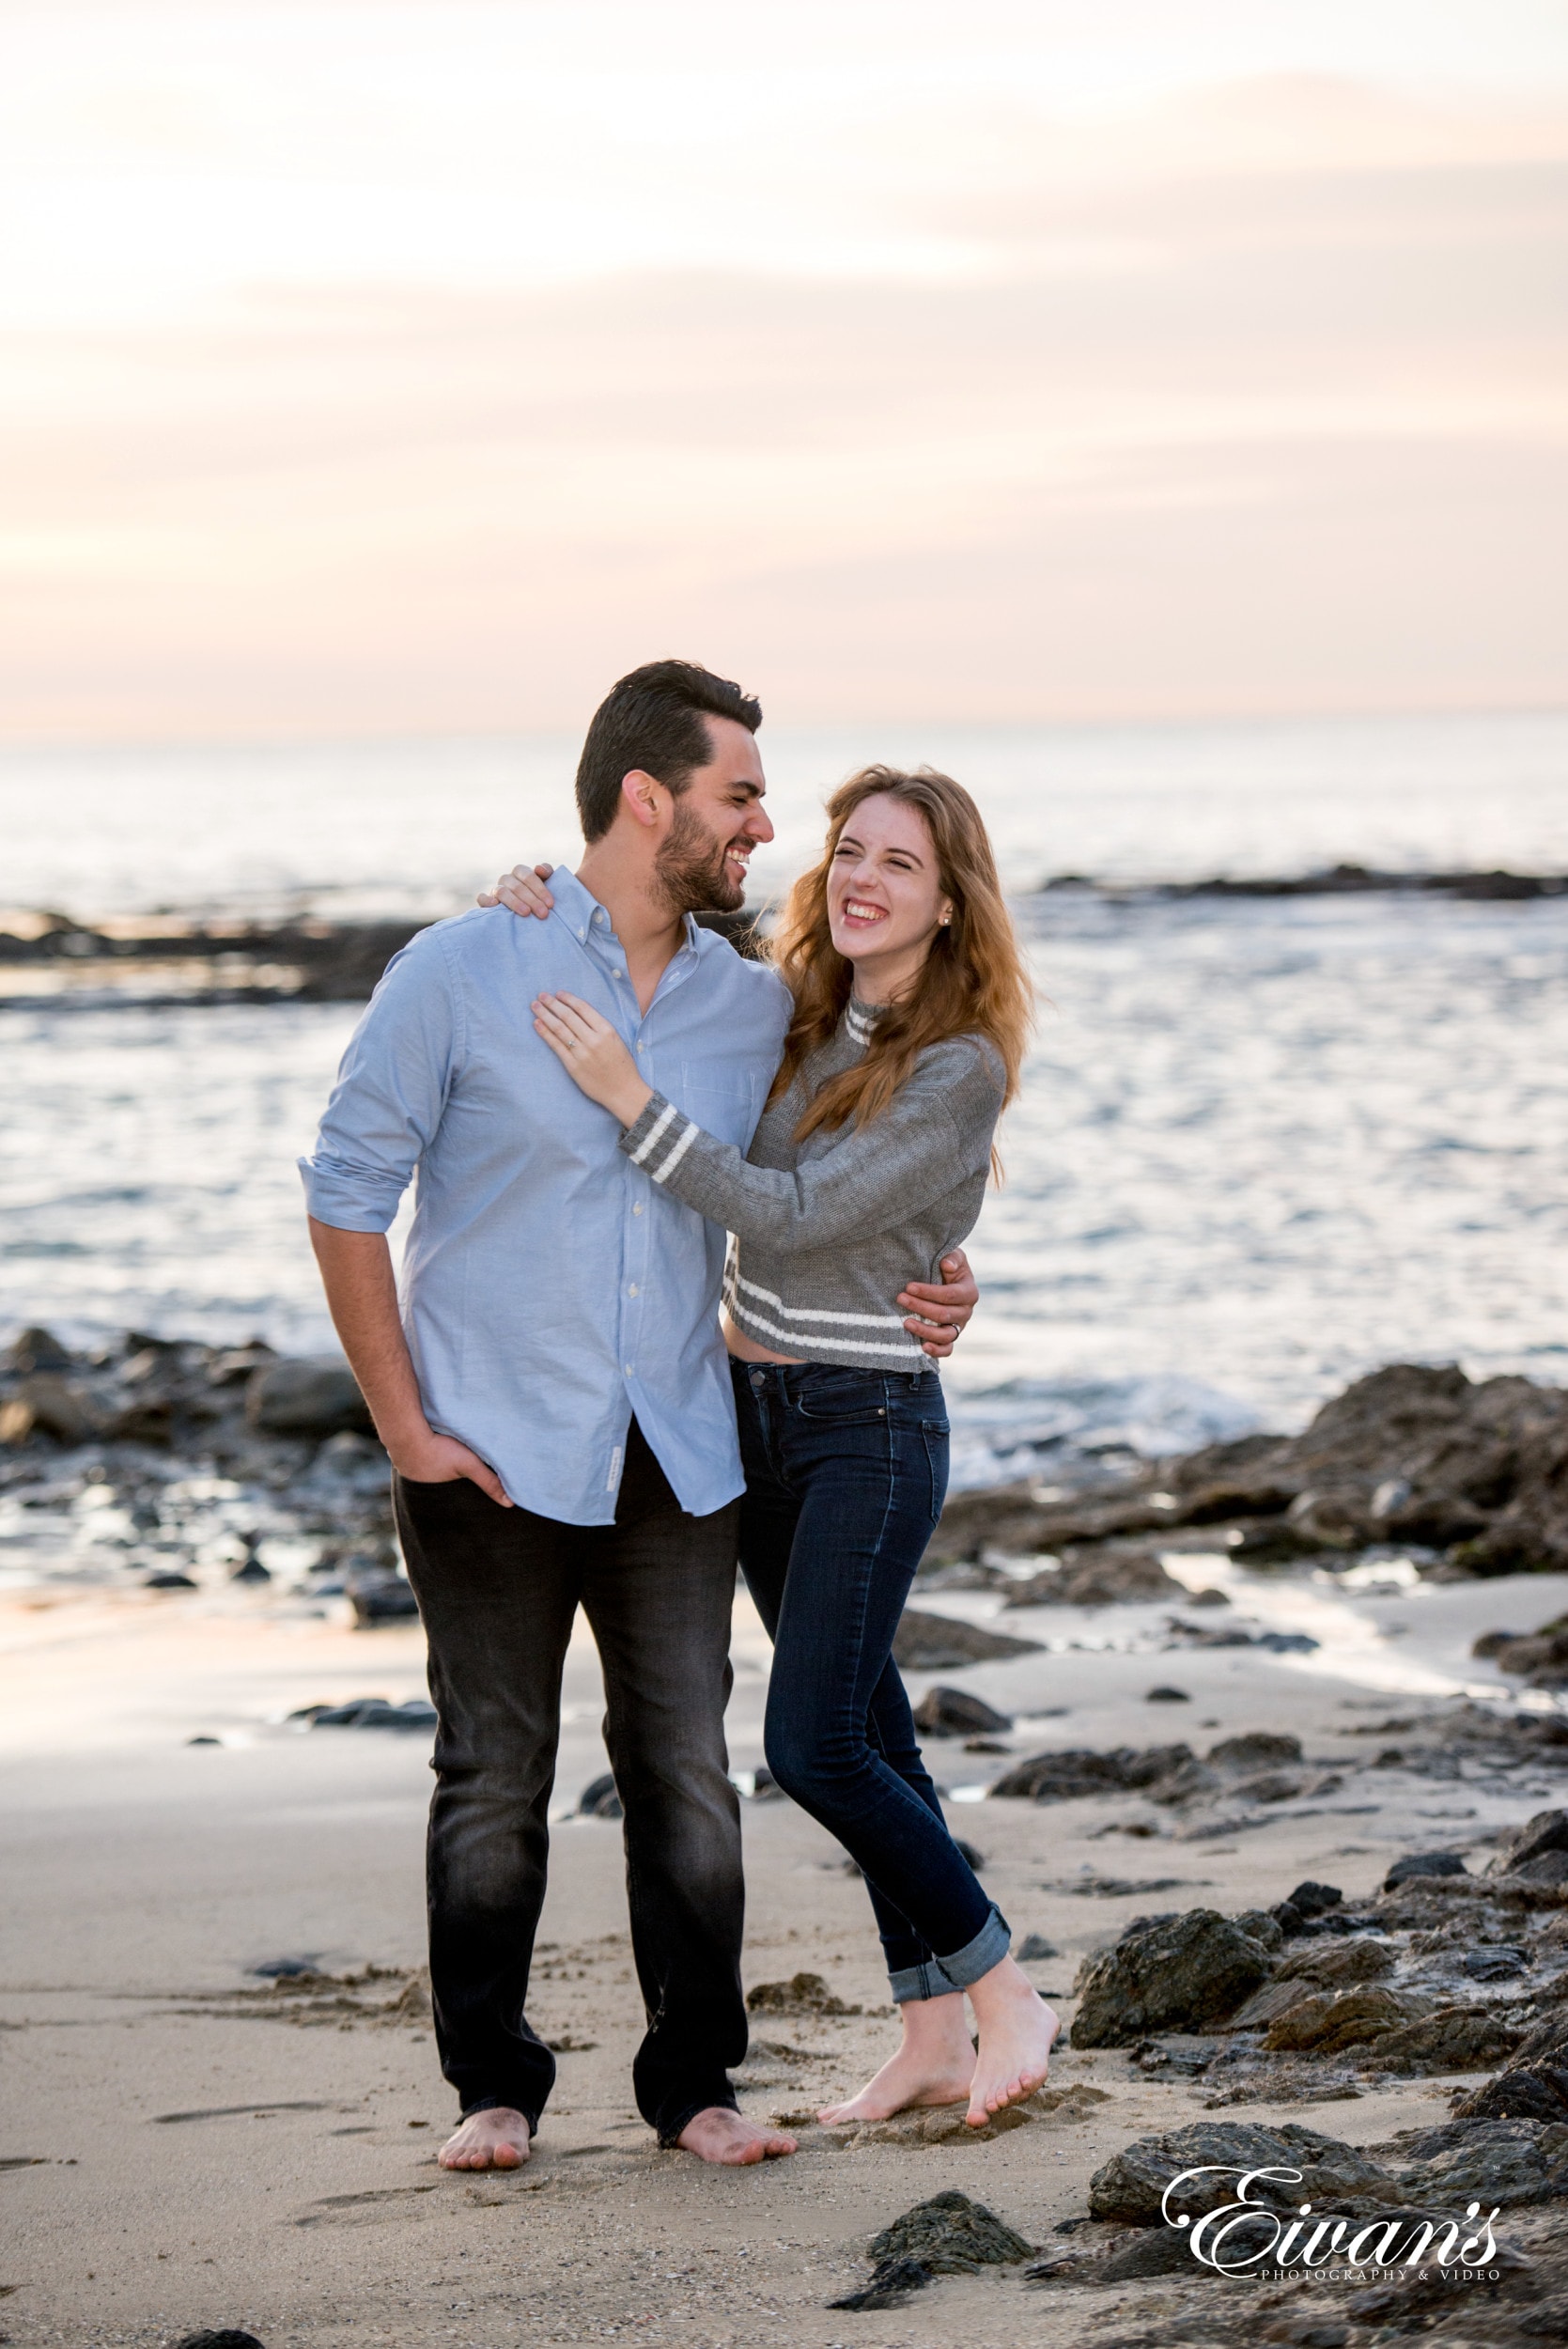 man in white dress shirt kissing woman in gray long sleeve shirt on beach during daytime